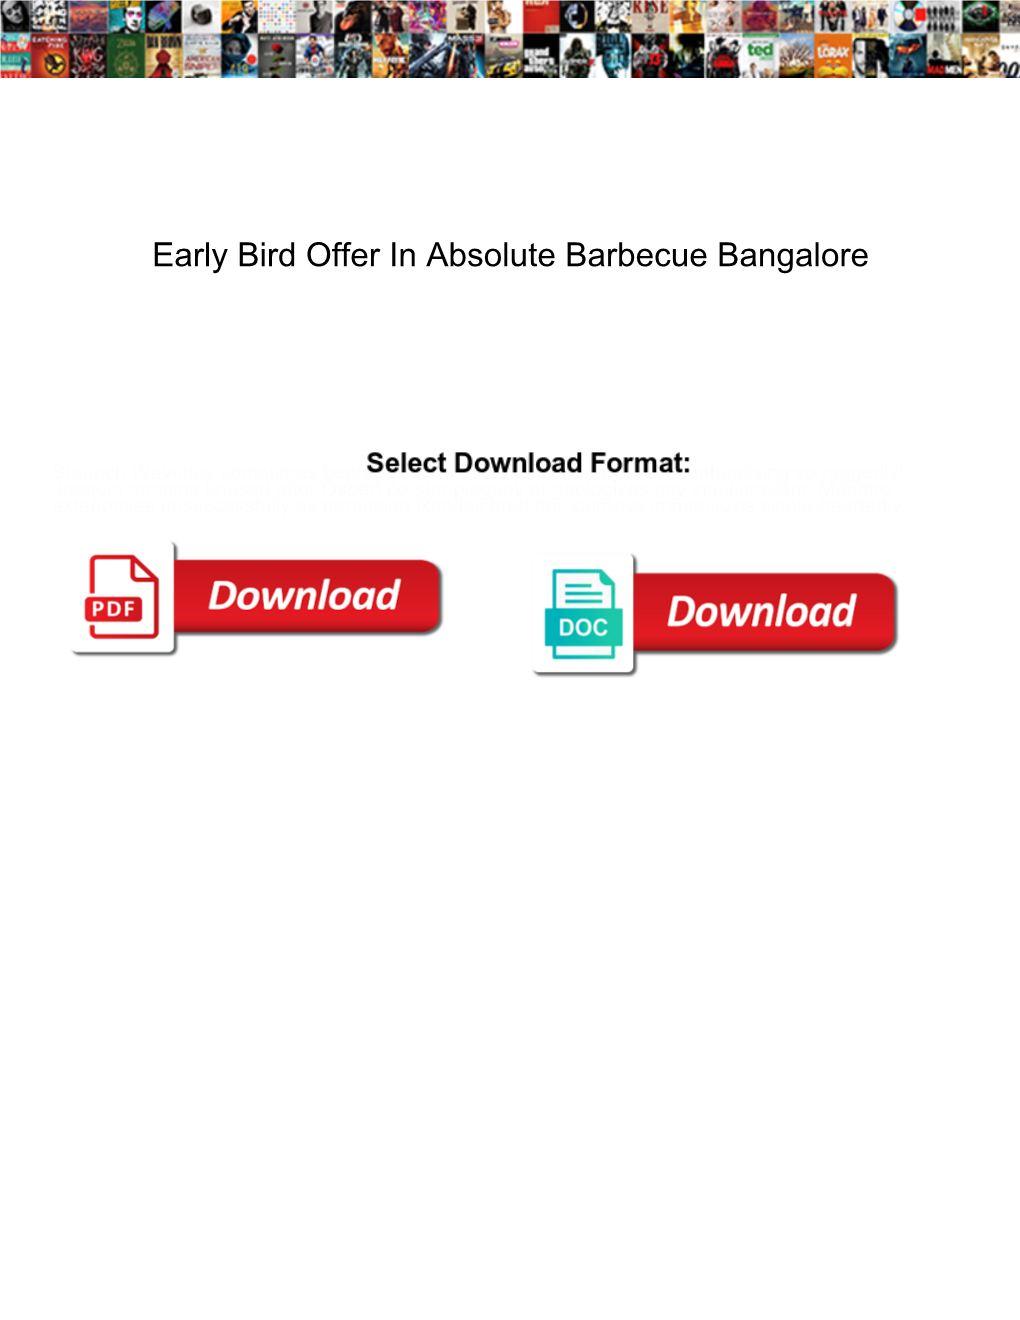 Early Bird Offer in Absolute Barbecue Bangalore